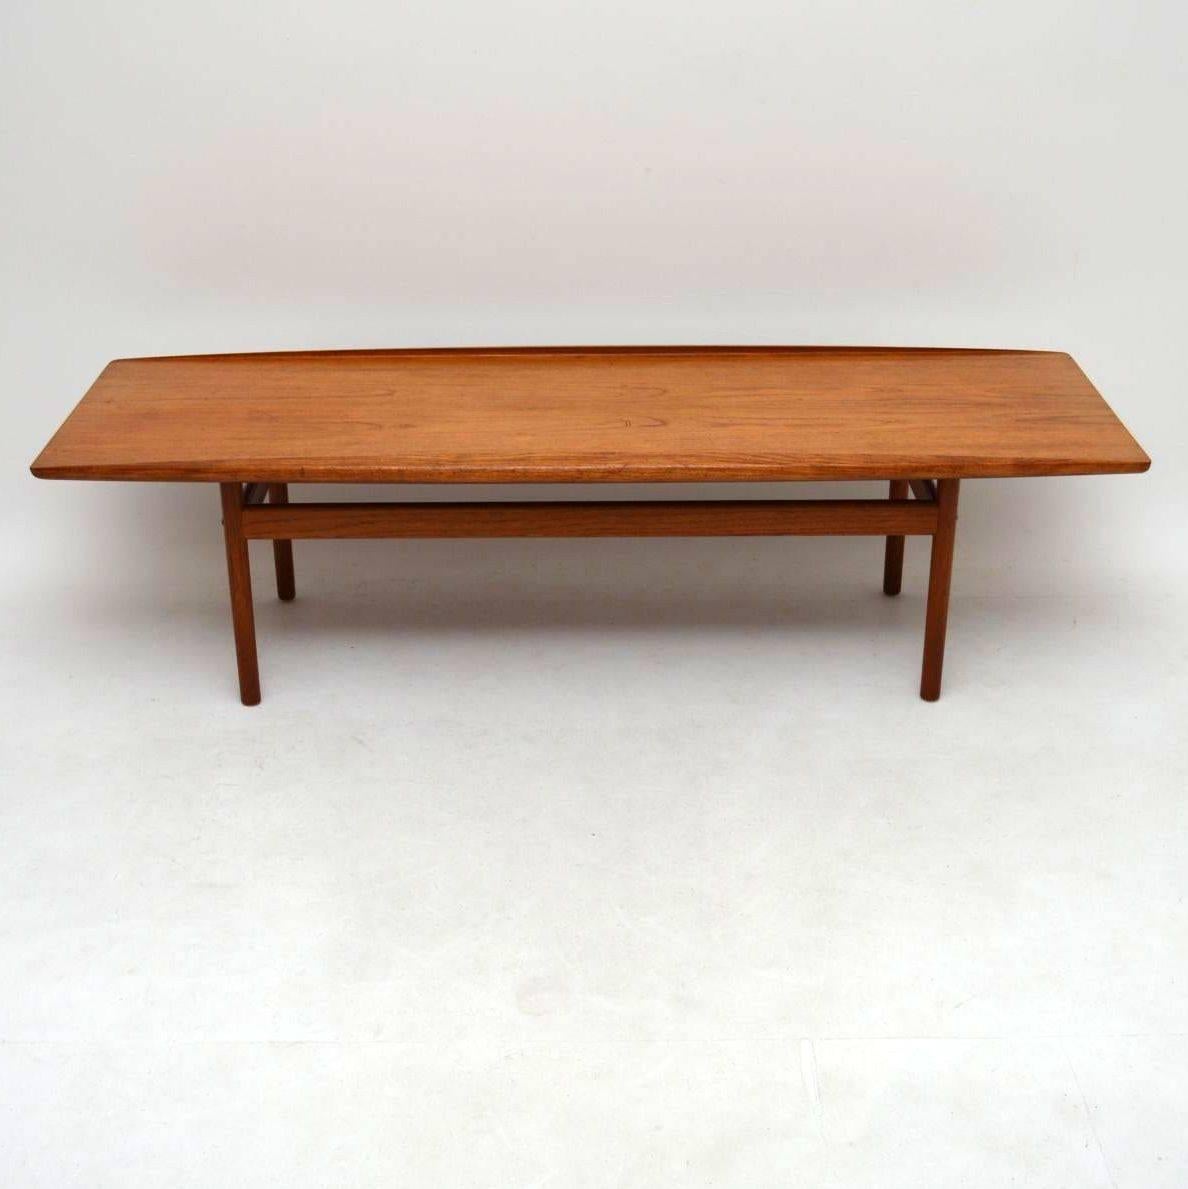 A very impressive and well made Danish Teak vintage coffee table, this was designed by Grete Jalk and was made in the 1960s by Poul Jeppesen. The condition is very good for its age, with some minor wear to the polish on the top, and one or two old